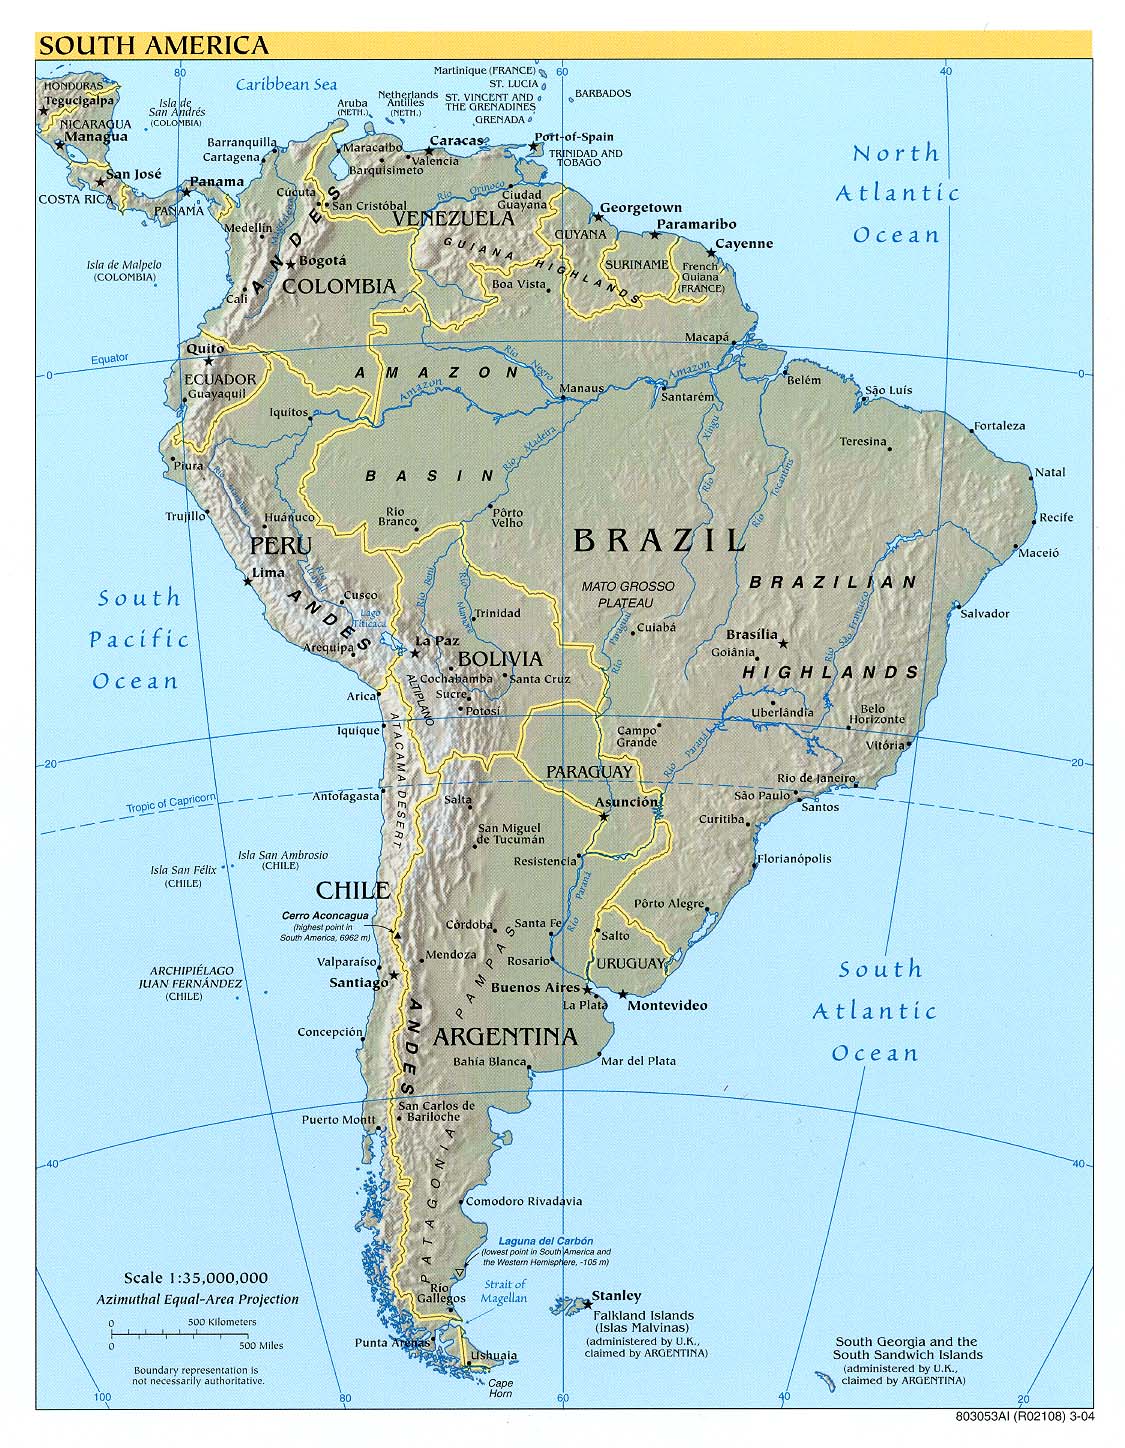 South America (Reference Map)